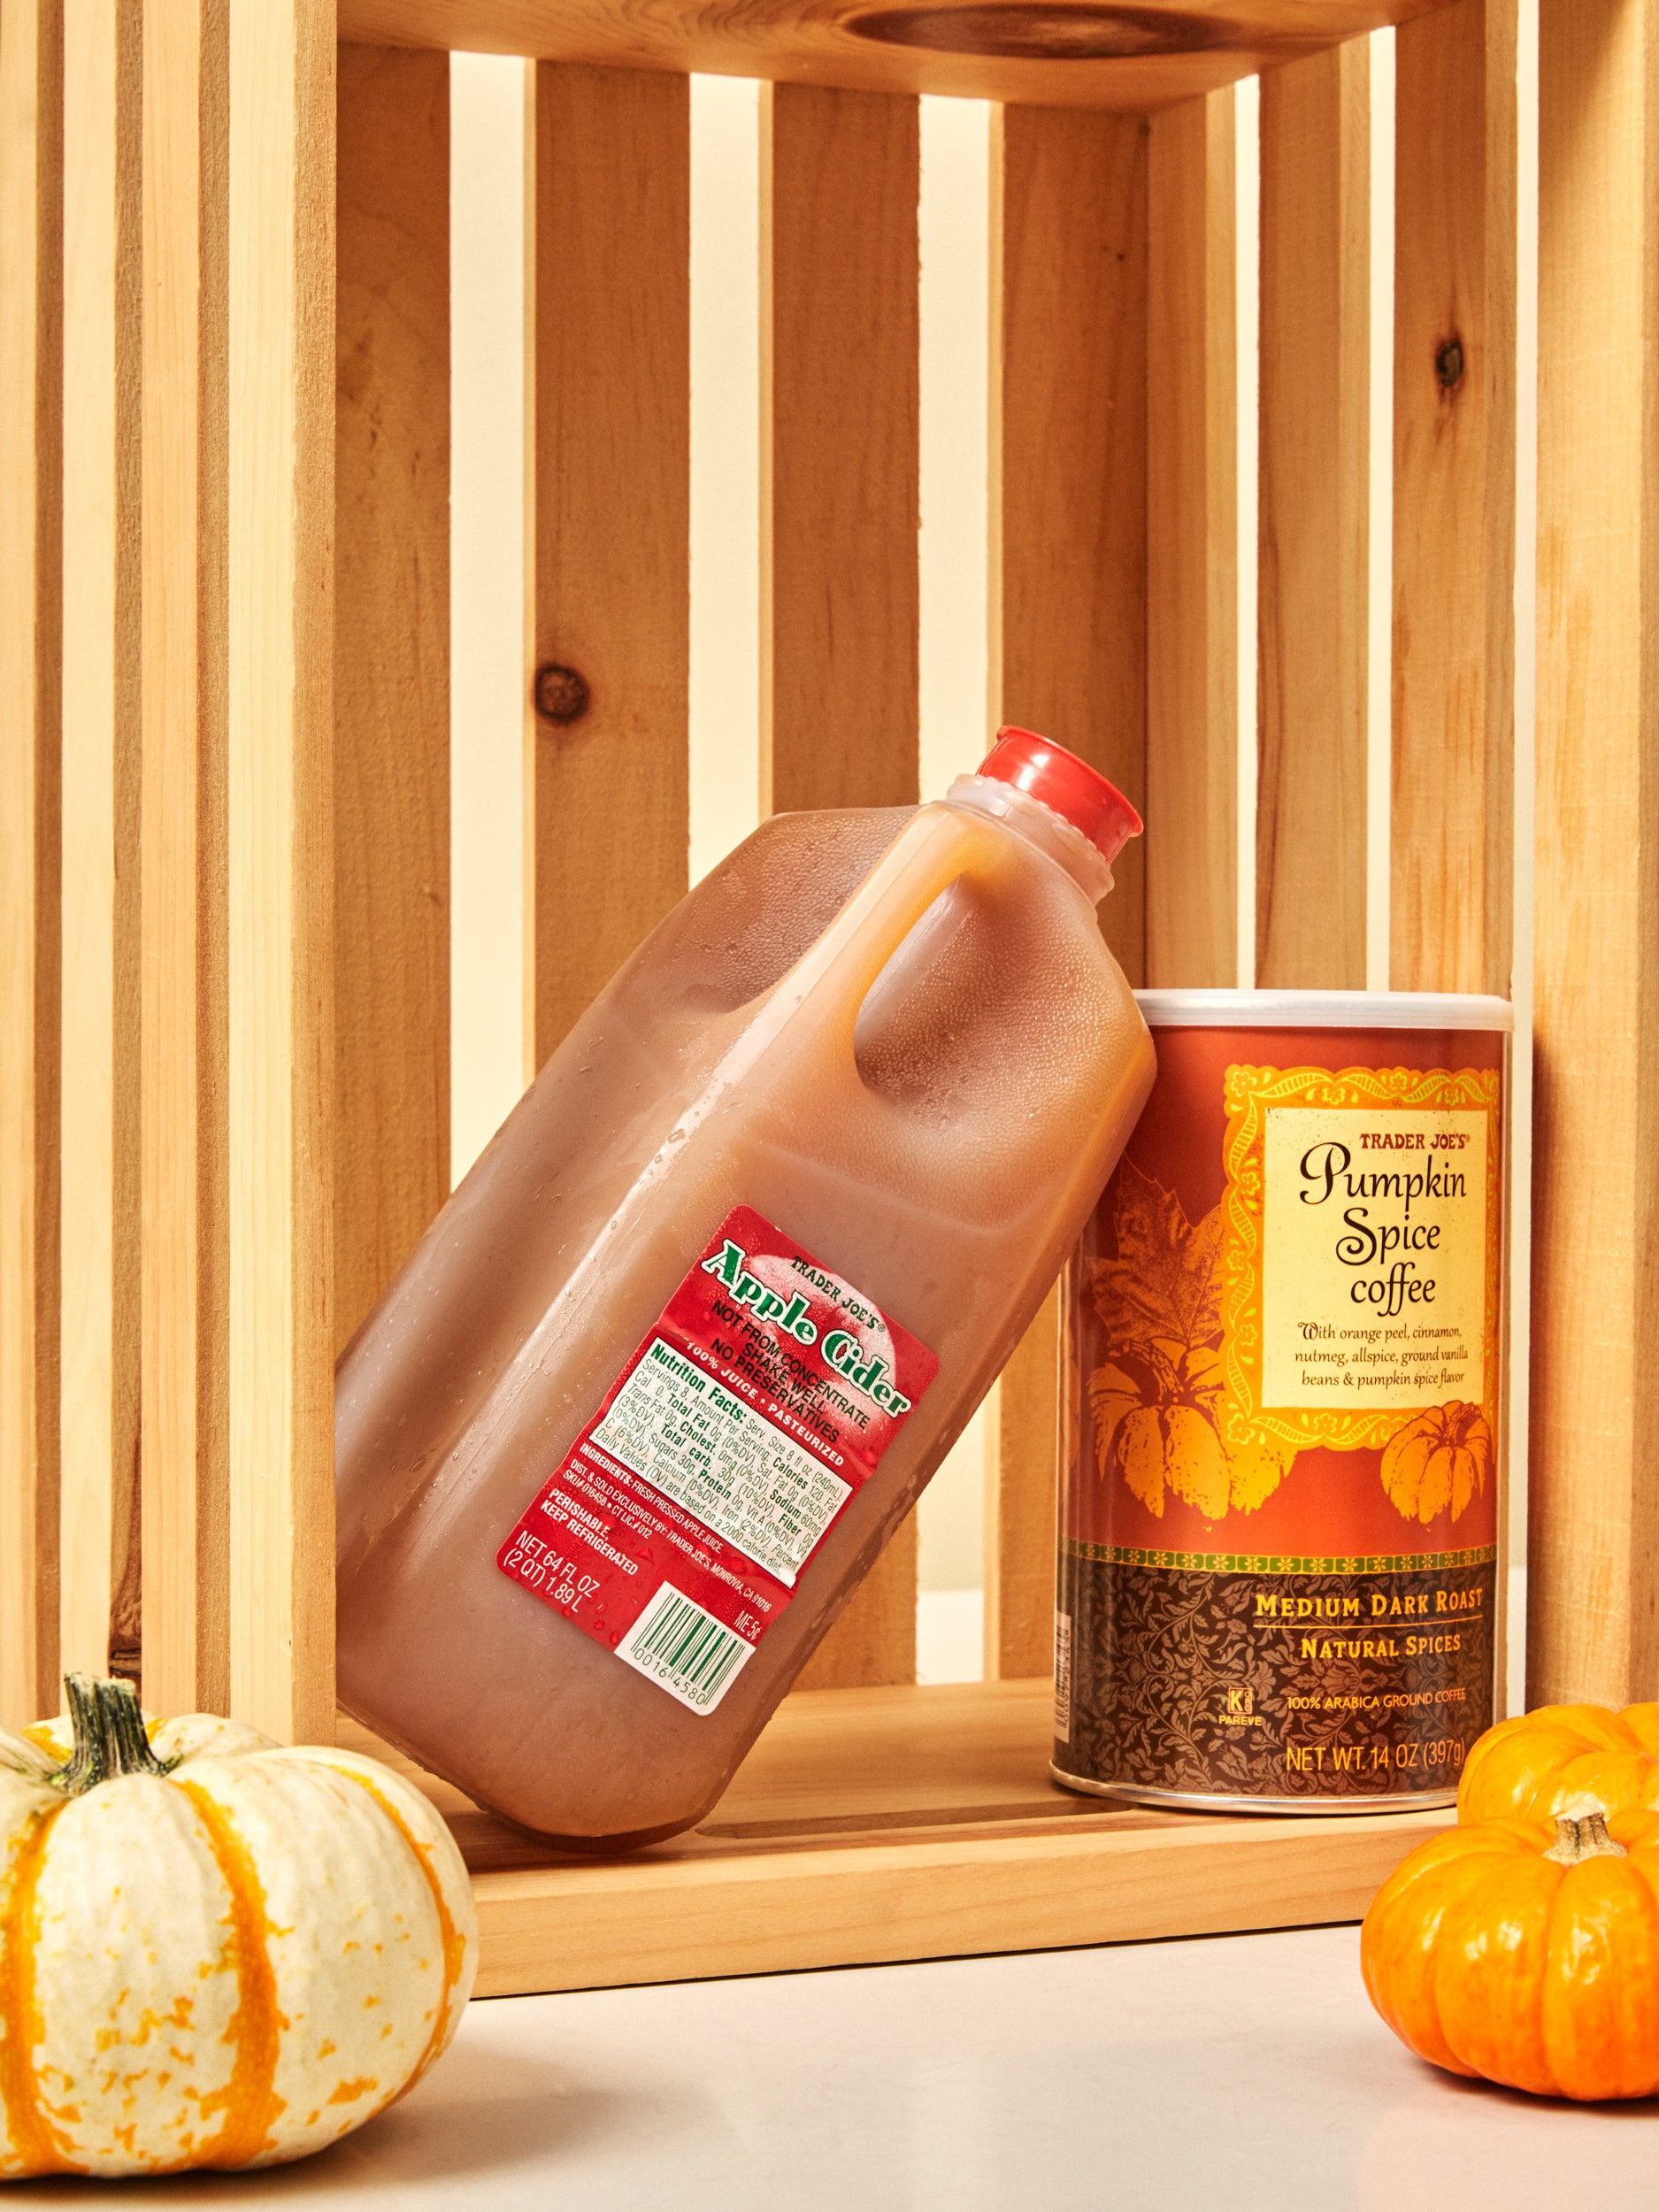 Psst…Trader Joe’s Just Released a Ton of New Fall Items